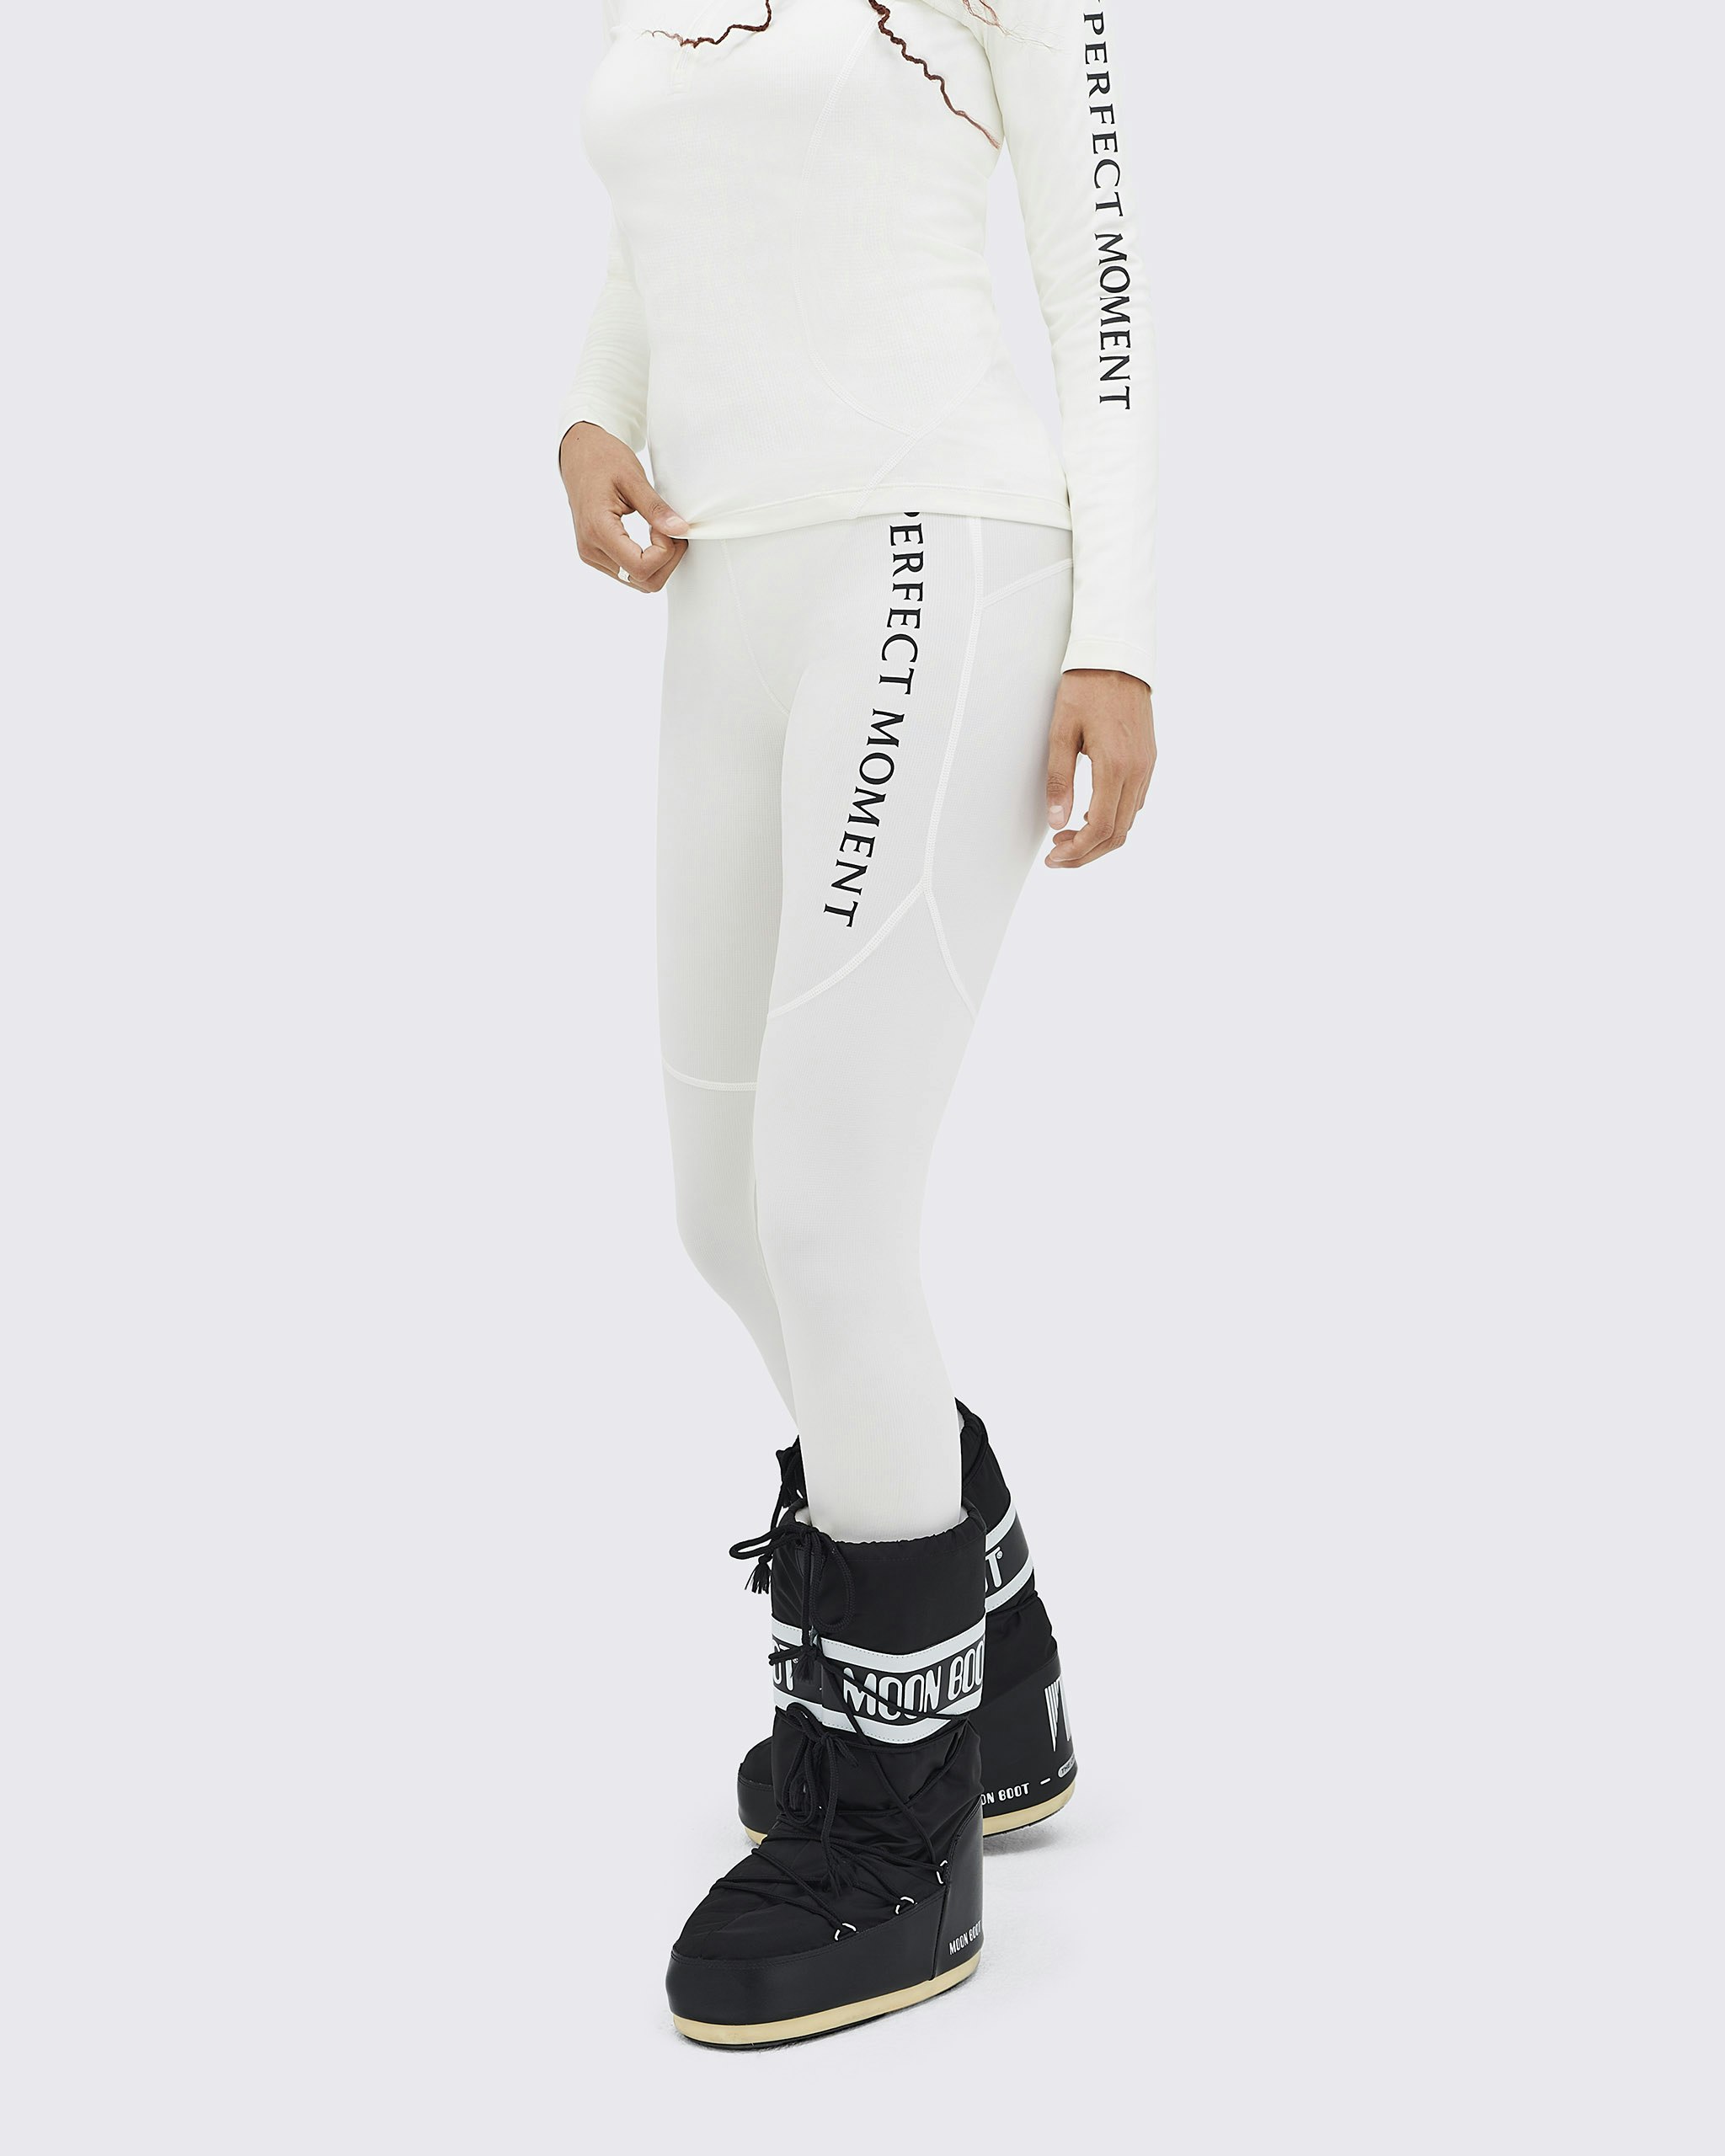 Women Thermal for Skiing - BL100 Black